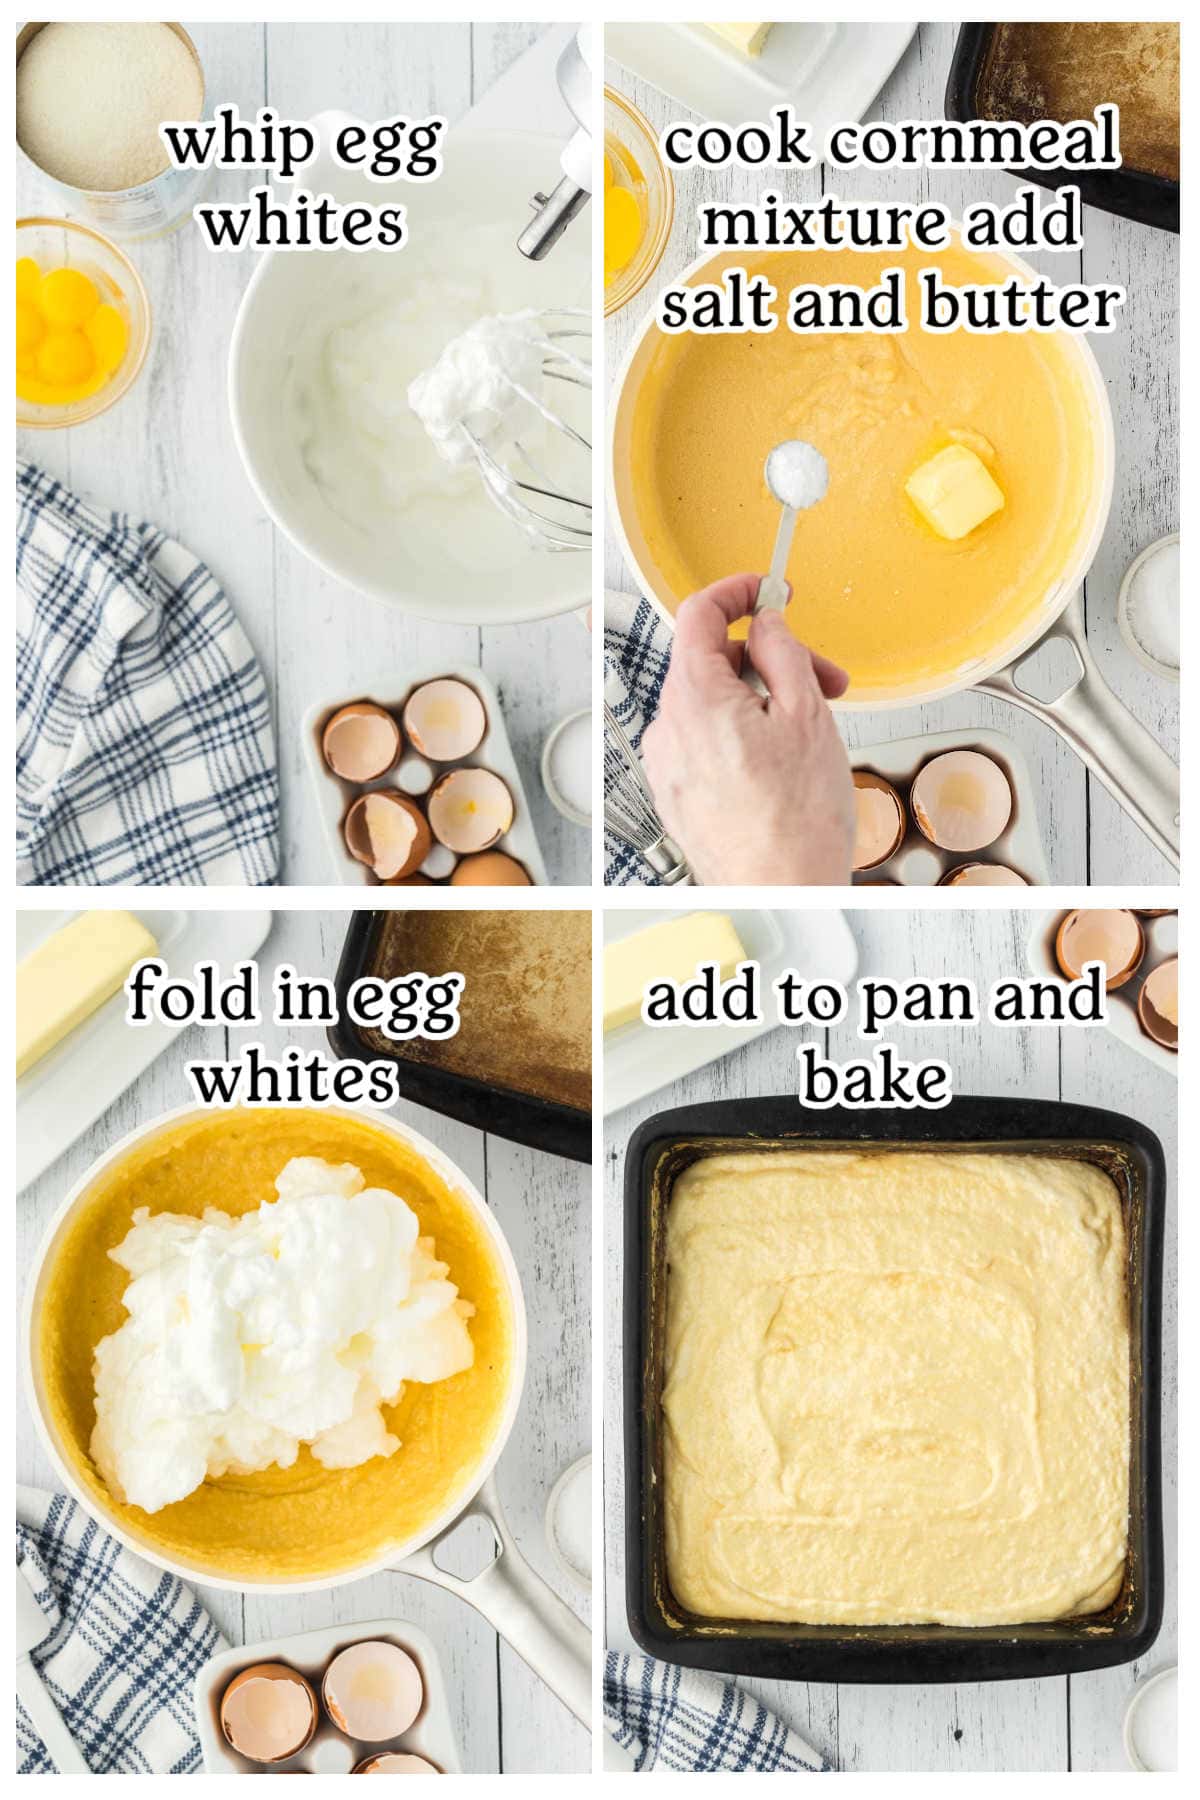 Four overhead images with text overlay depicting the main recipe process steps.